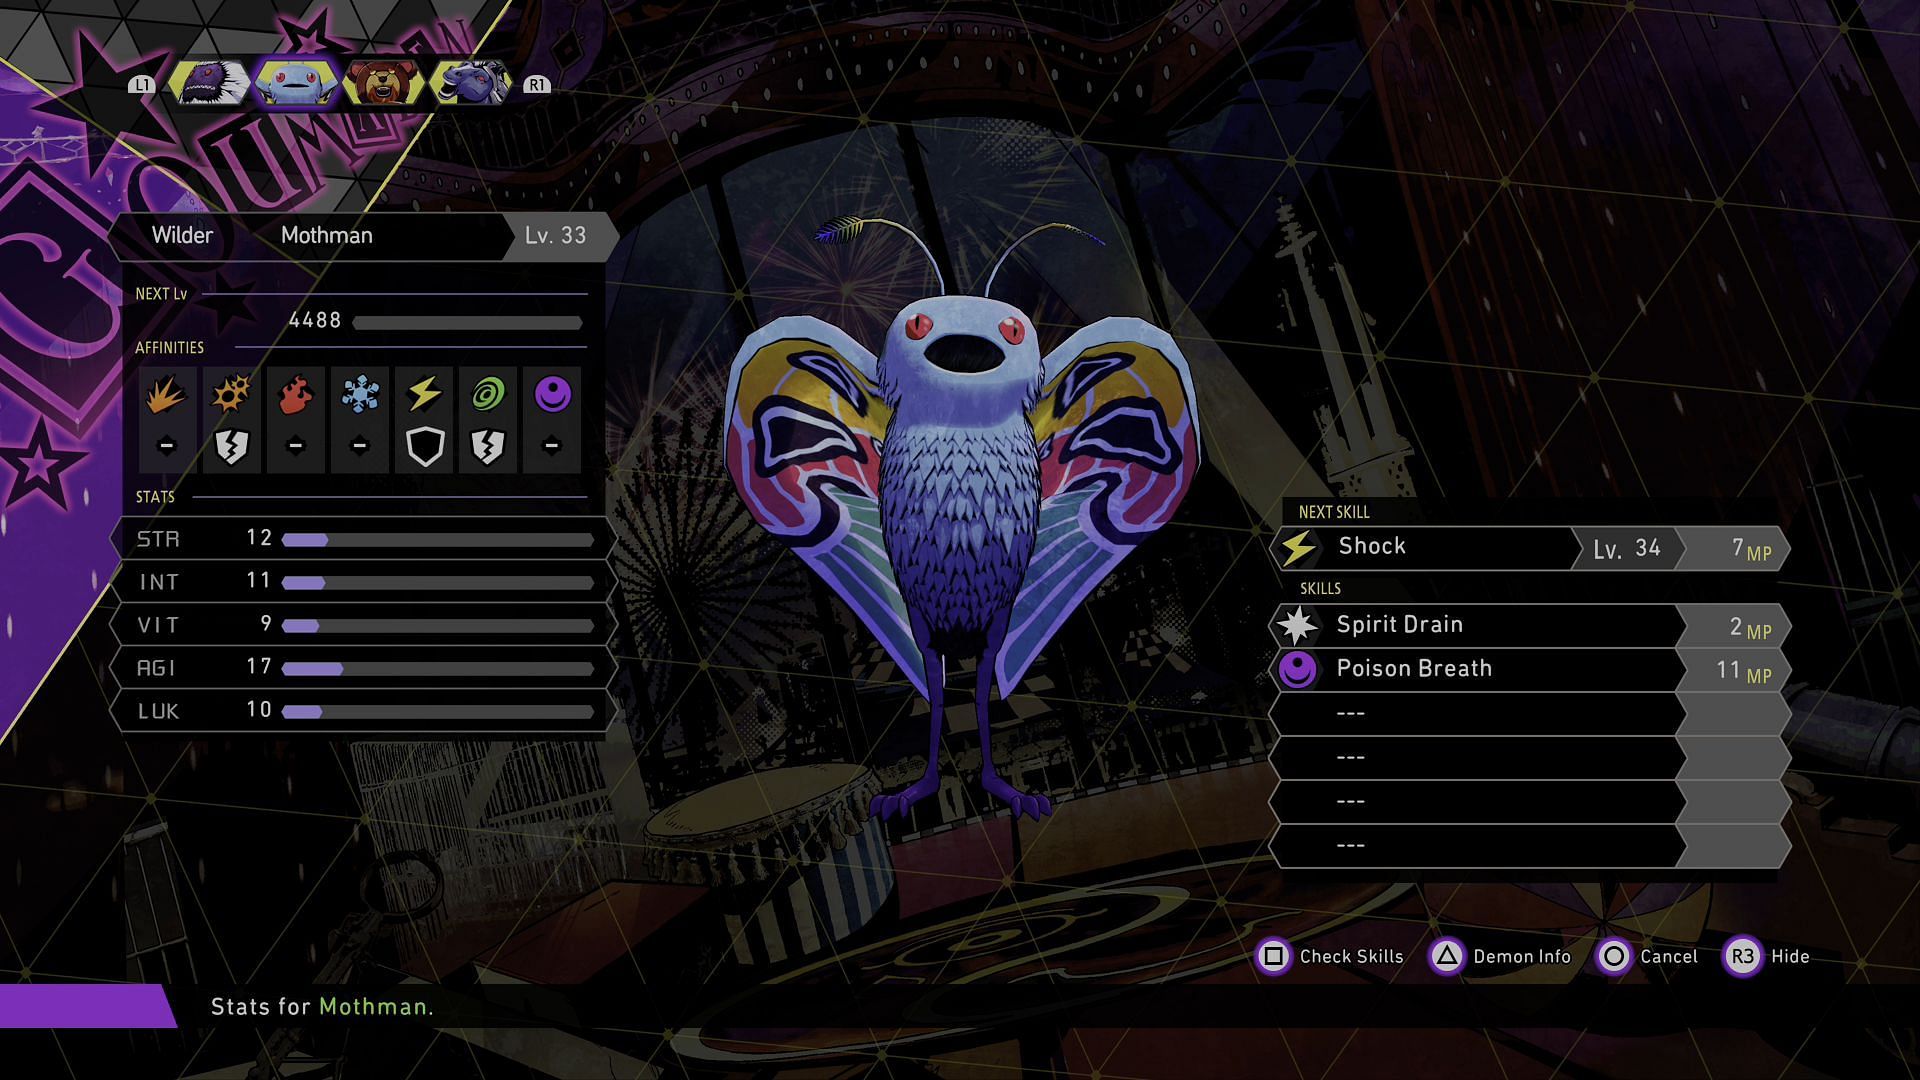 The popular Wilder Mothman is available to create in Soul Hackers 2 (Image via Atlus)